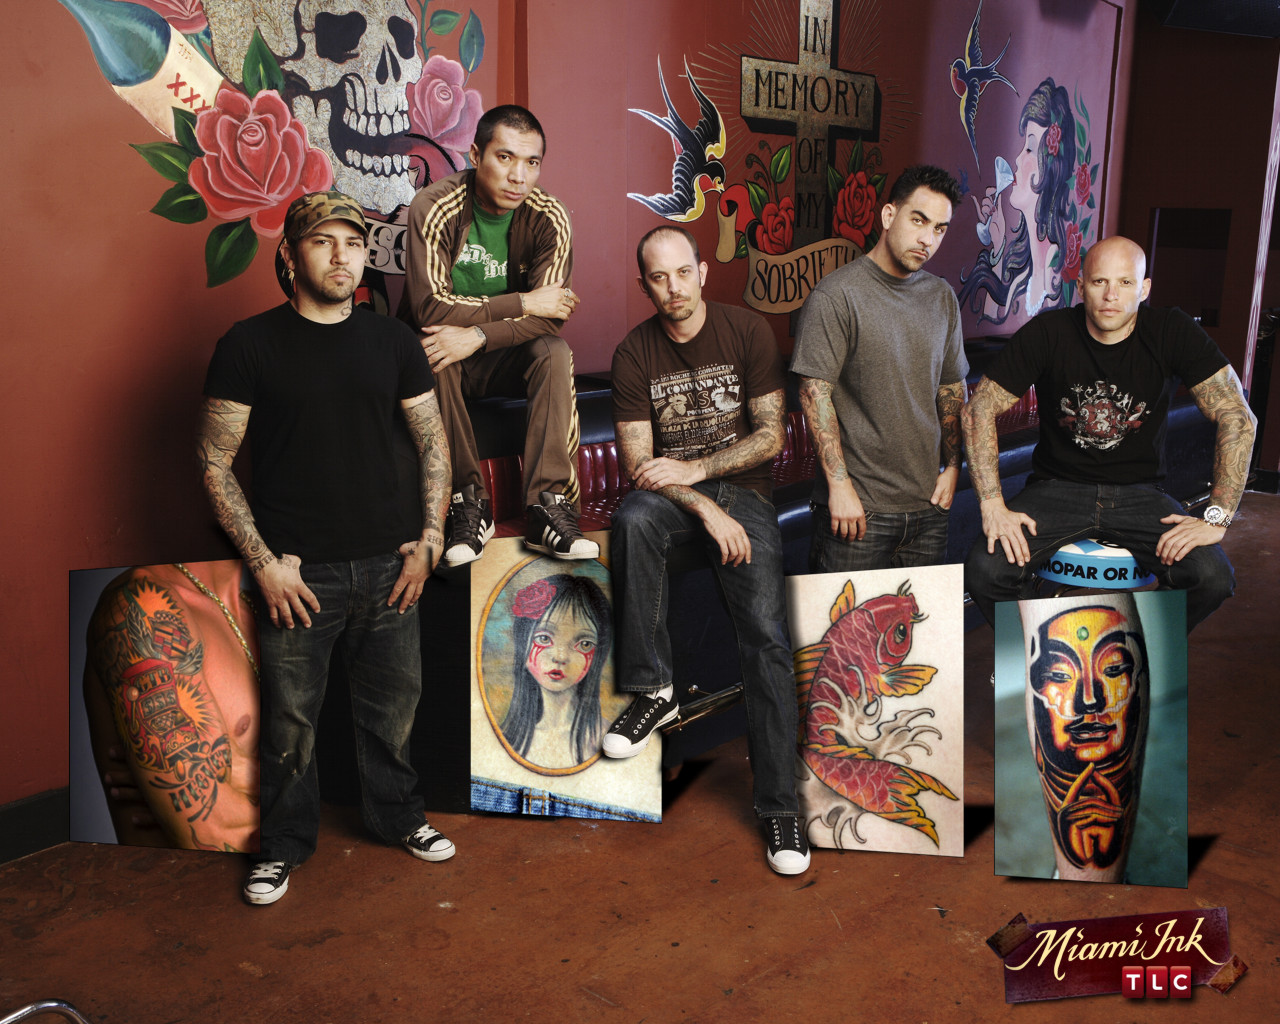 Miami Ink Image HD Wallpaper And Background